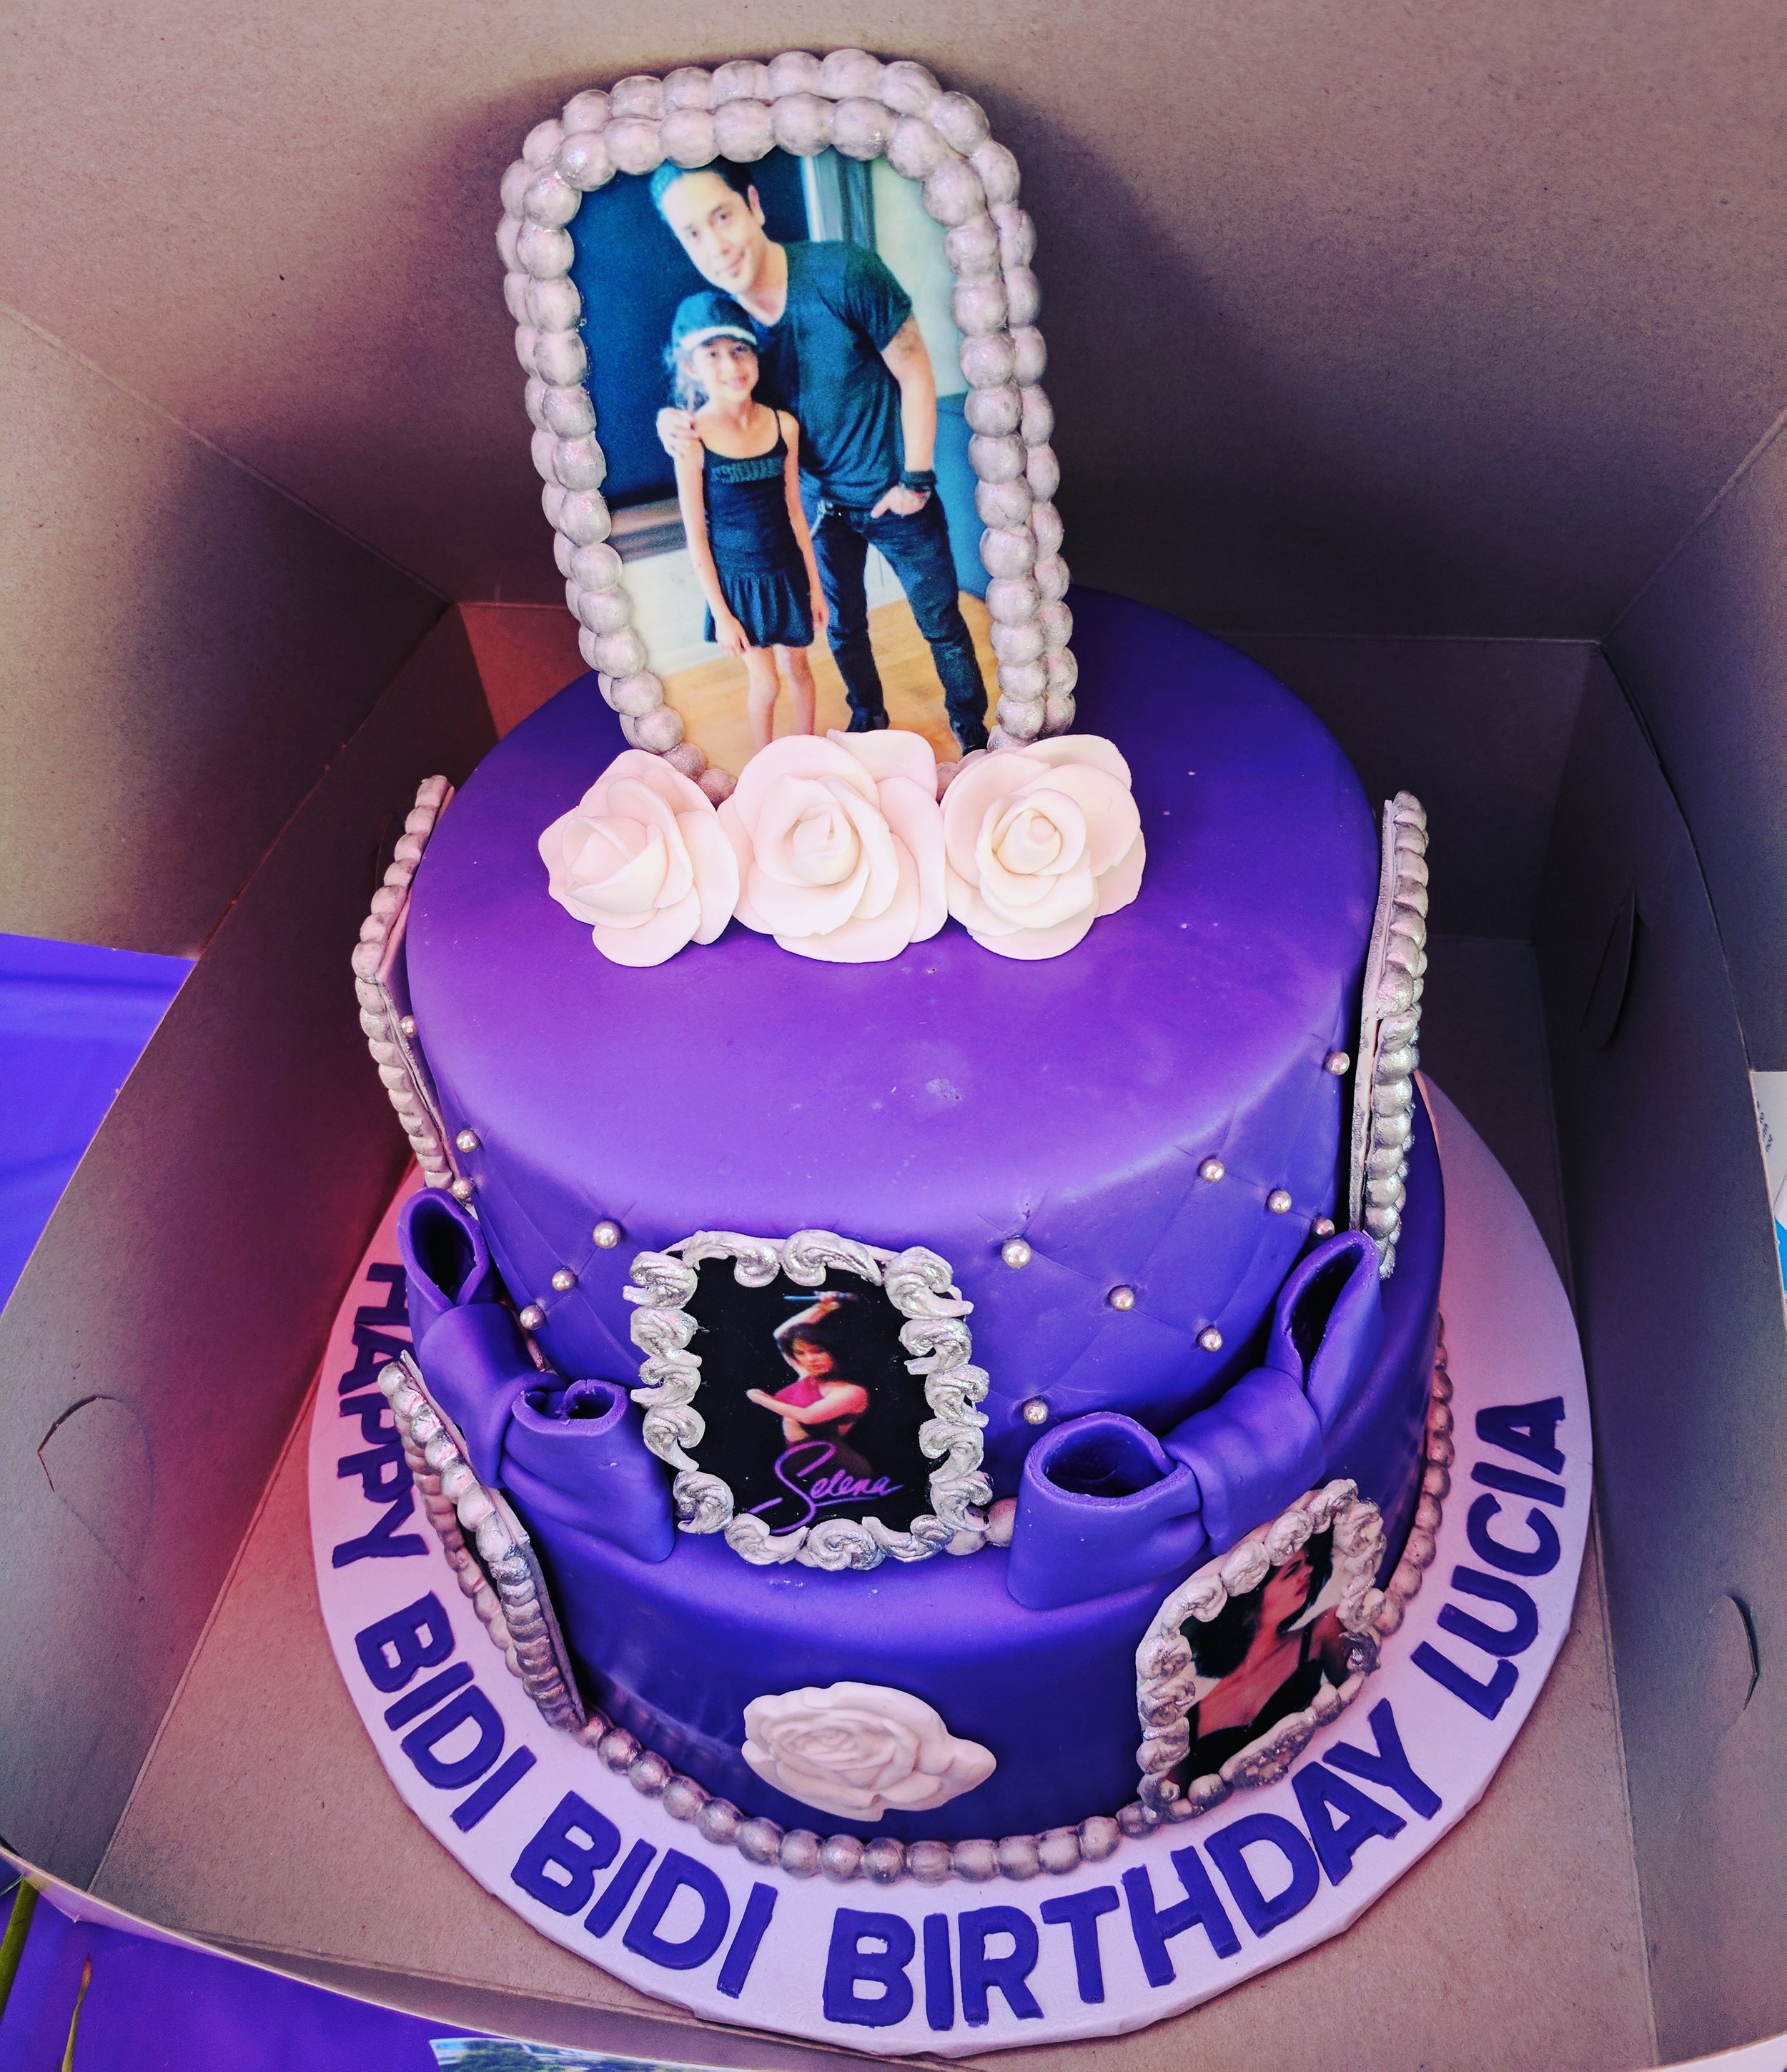 Lucia pictured with the late singer's husband Chris Perez on the "Bidi Bidi Cake" topper. (Selena's famous song "Bidi Bidi Bom Bom" has become an anthem of sorts during Latino parties).